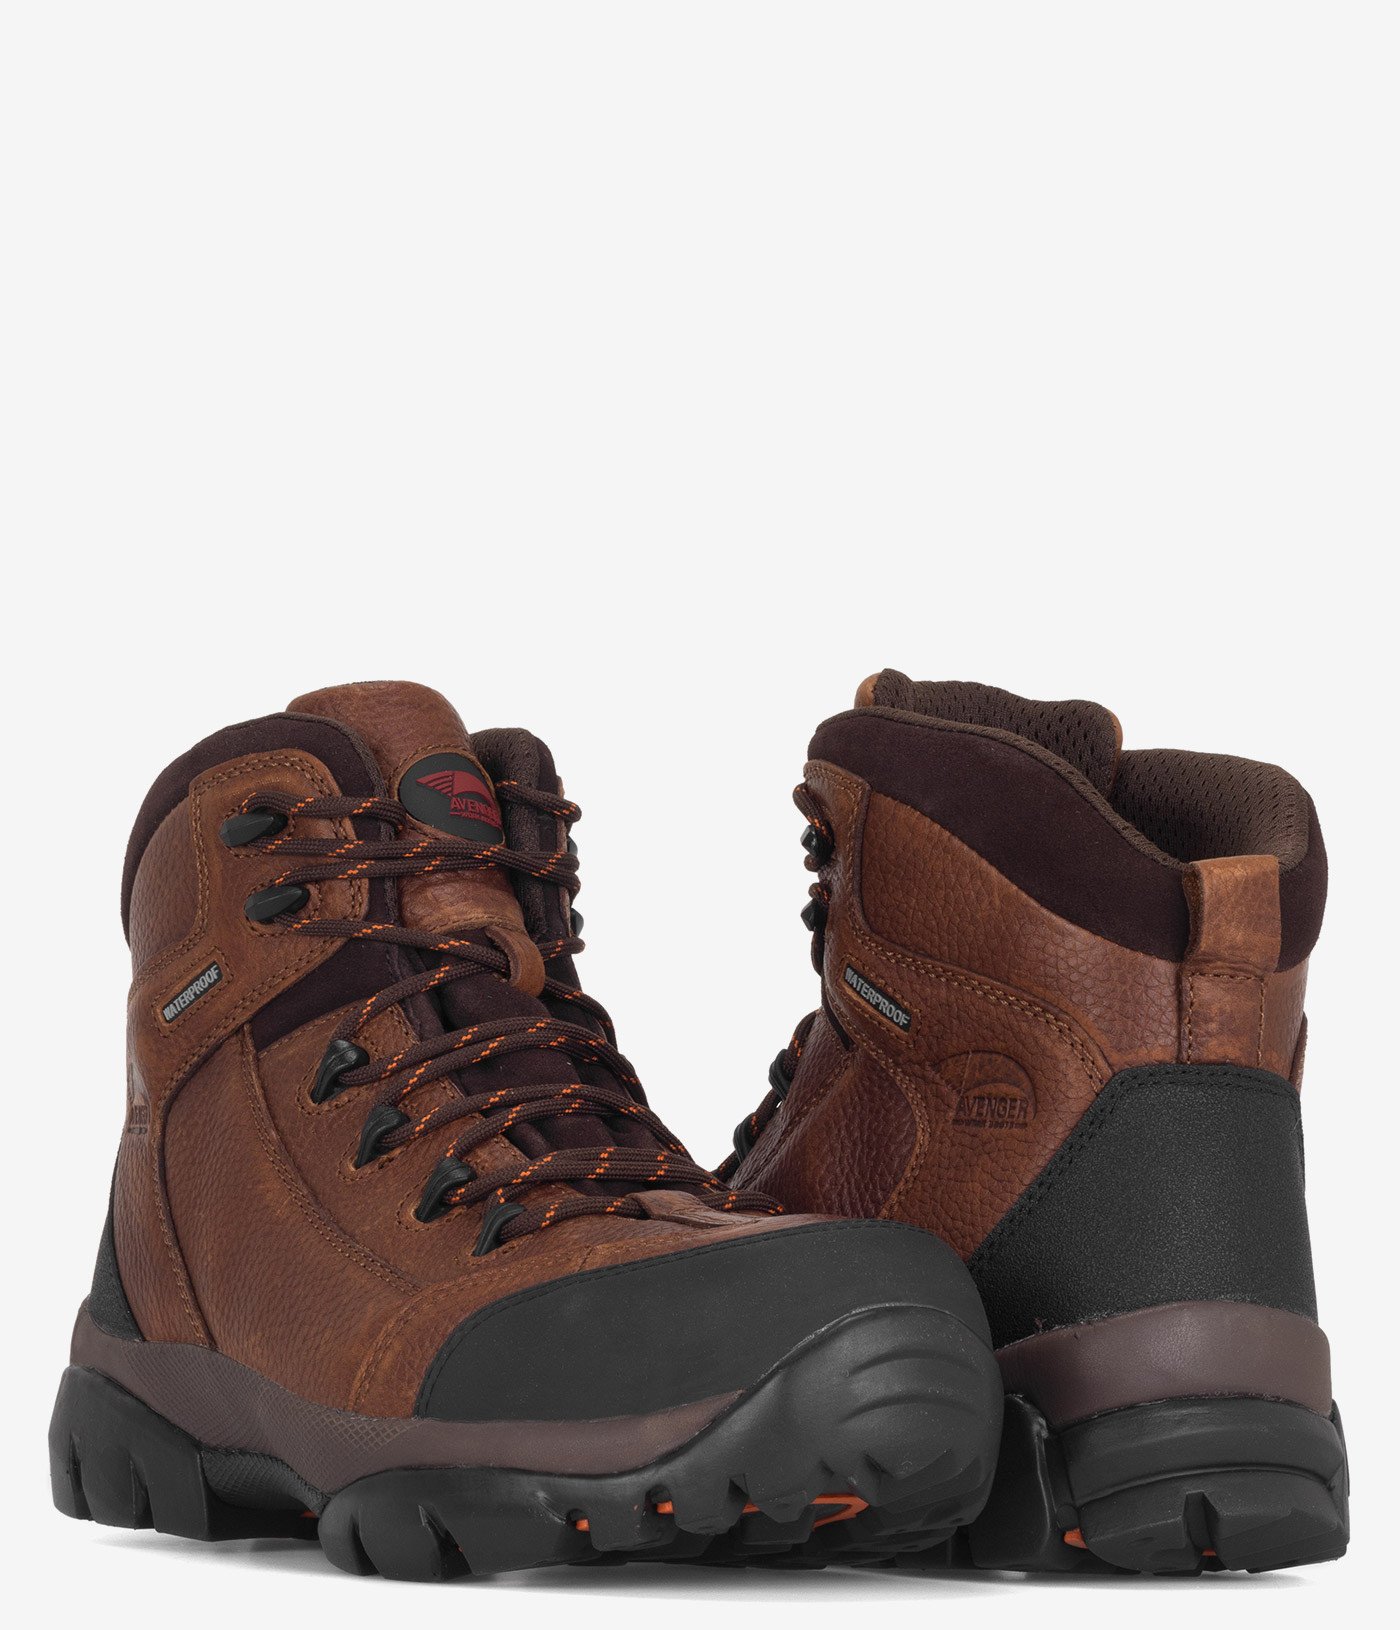 Avenger 6" Composite Safety Toe Waterproof Boot | Pair